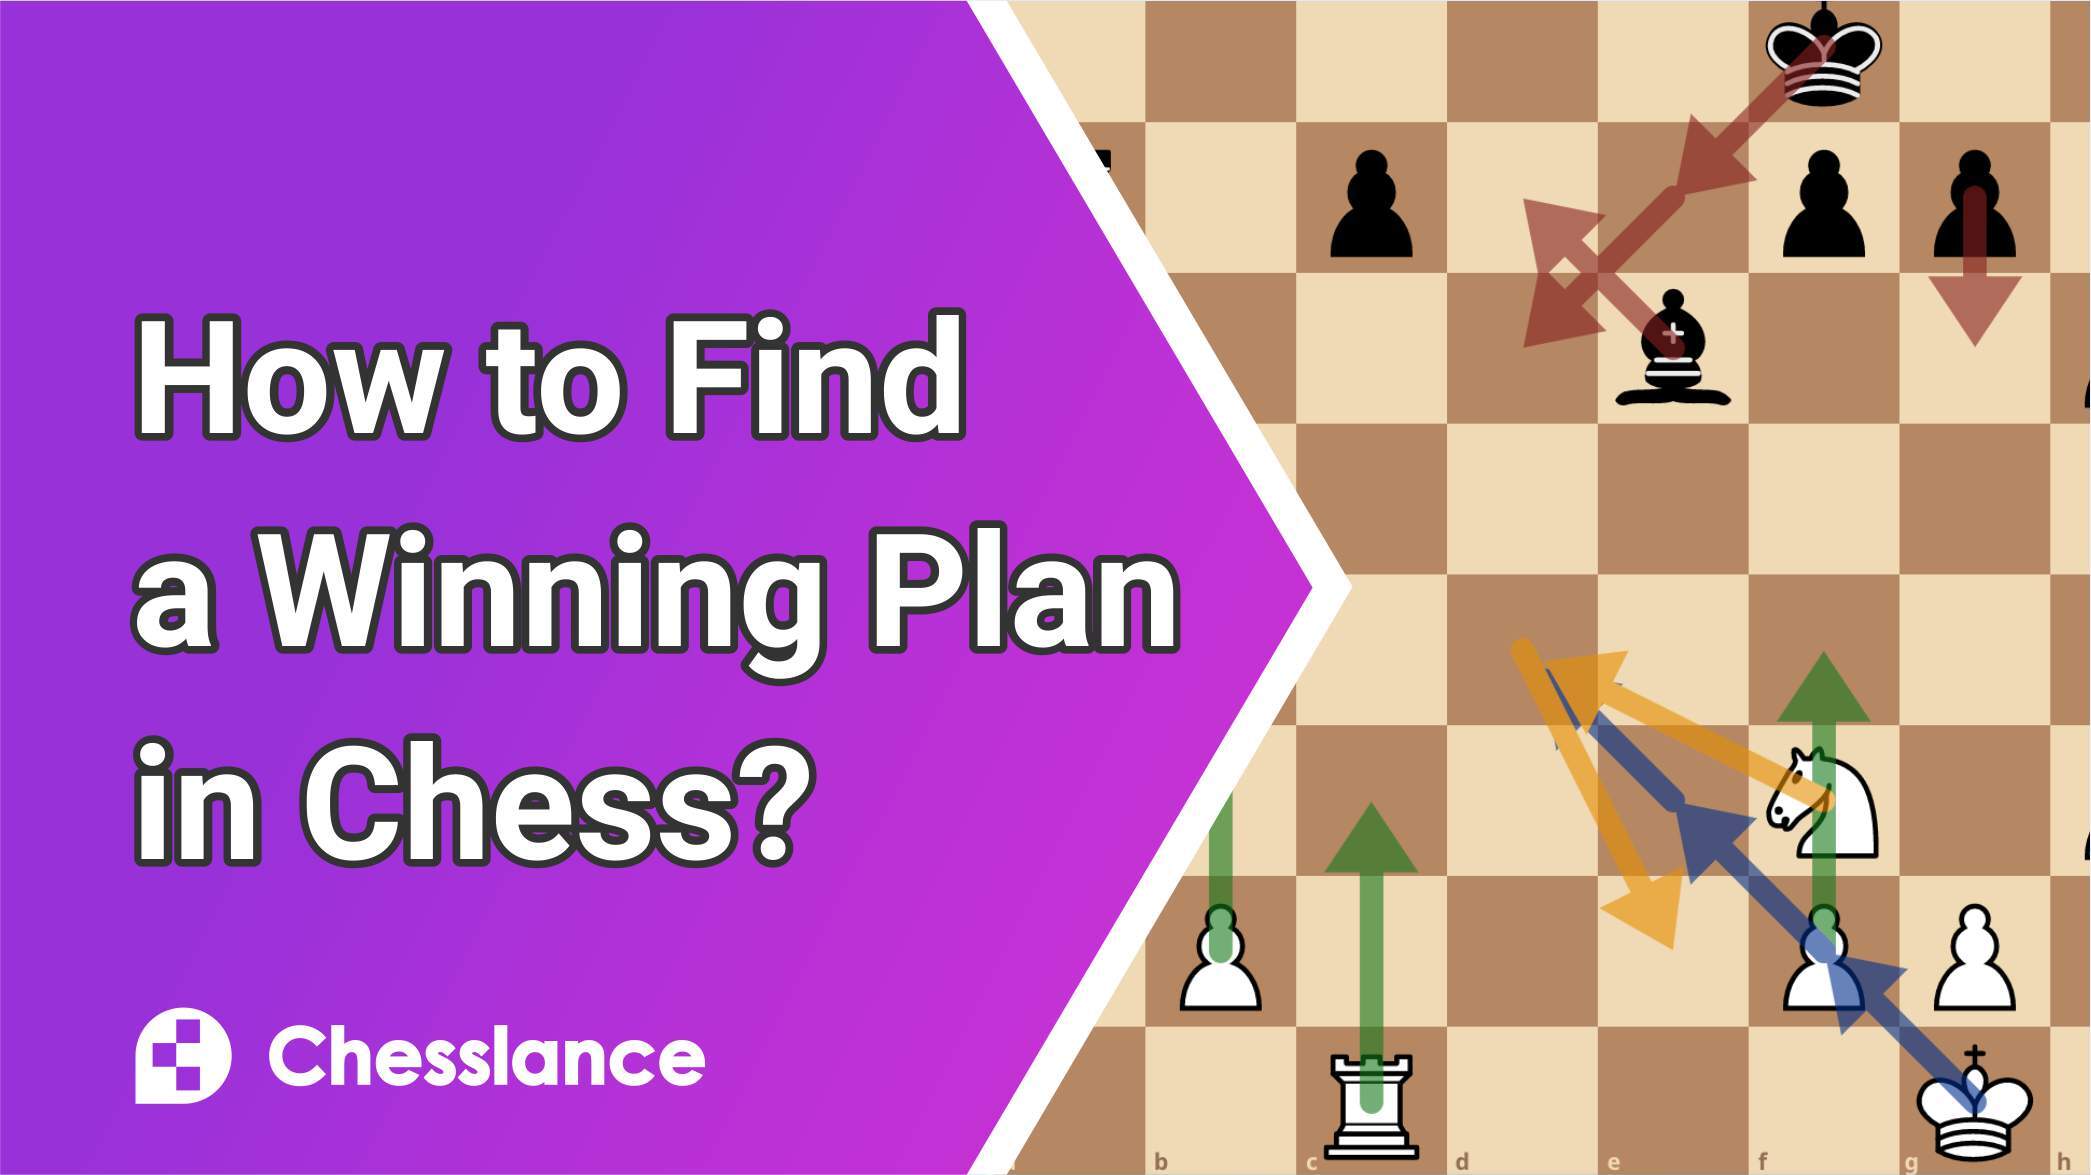 Winning Plan at Chess: How to Find?